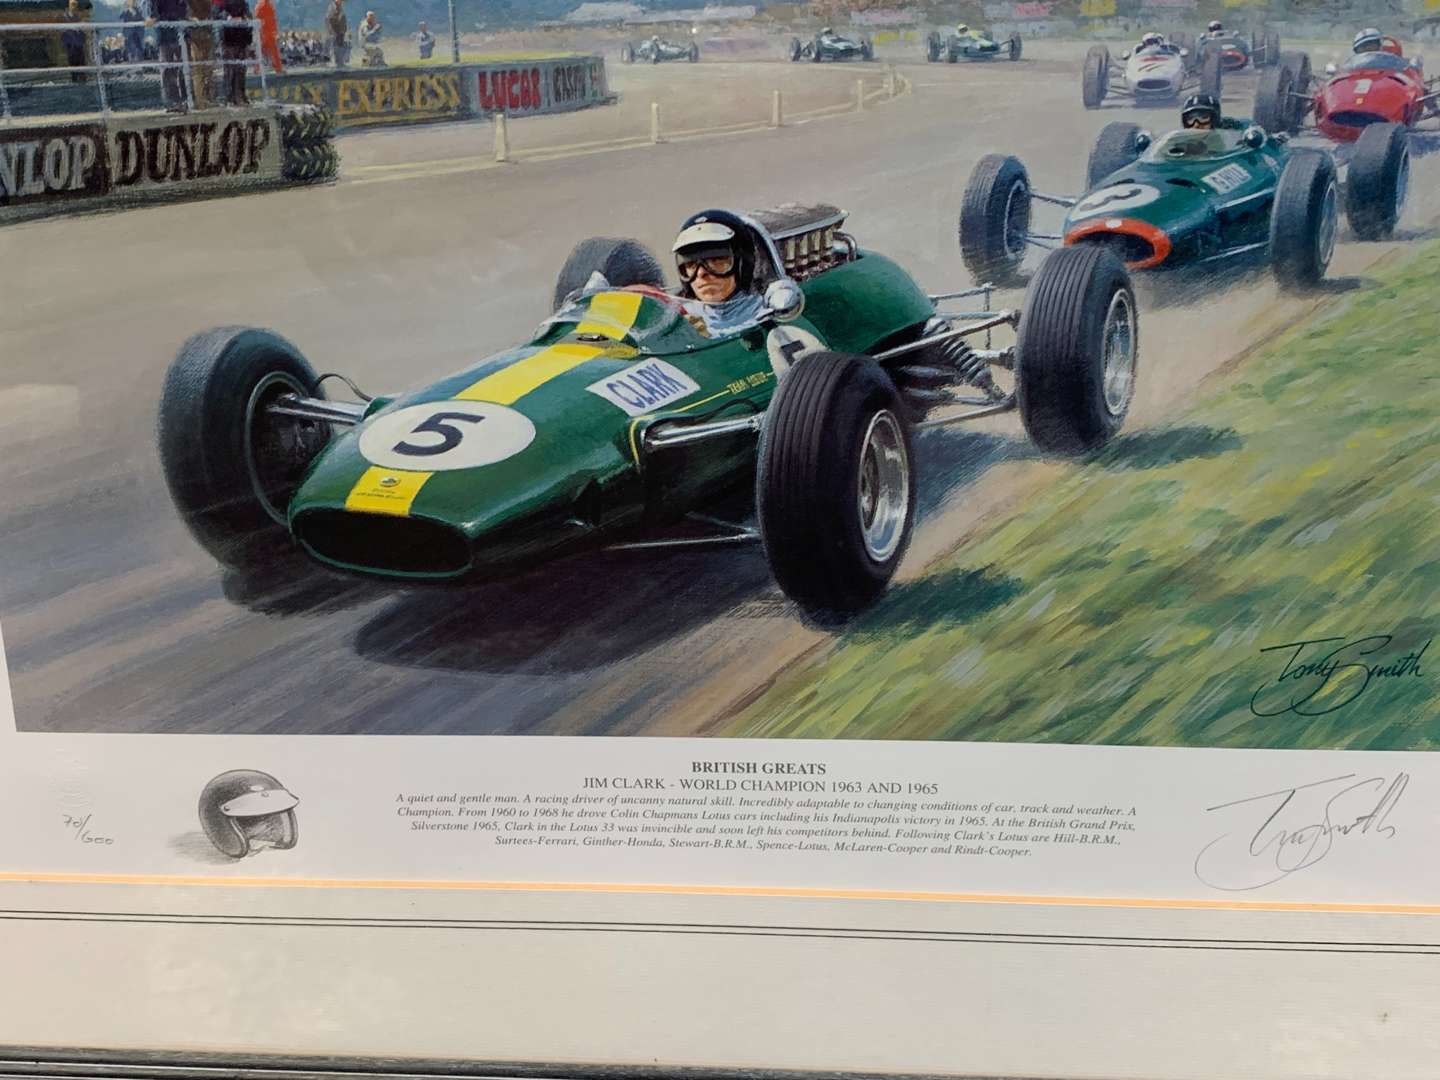 <p>Two Framed Photos Graham Hill and Silverstone Framed Print (3)</p>